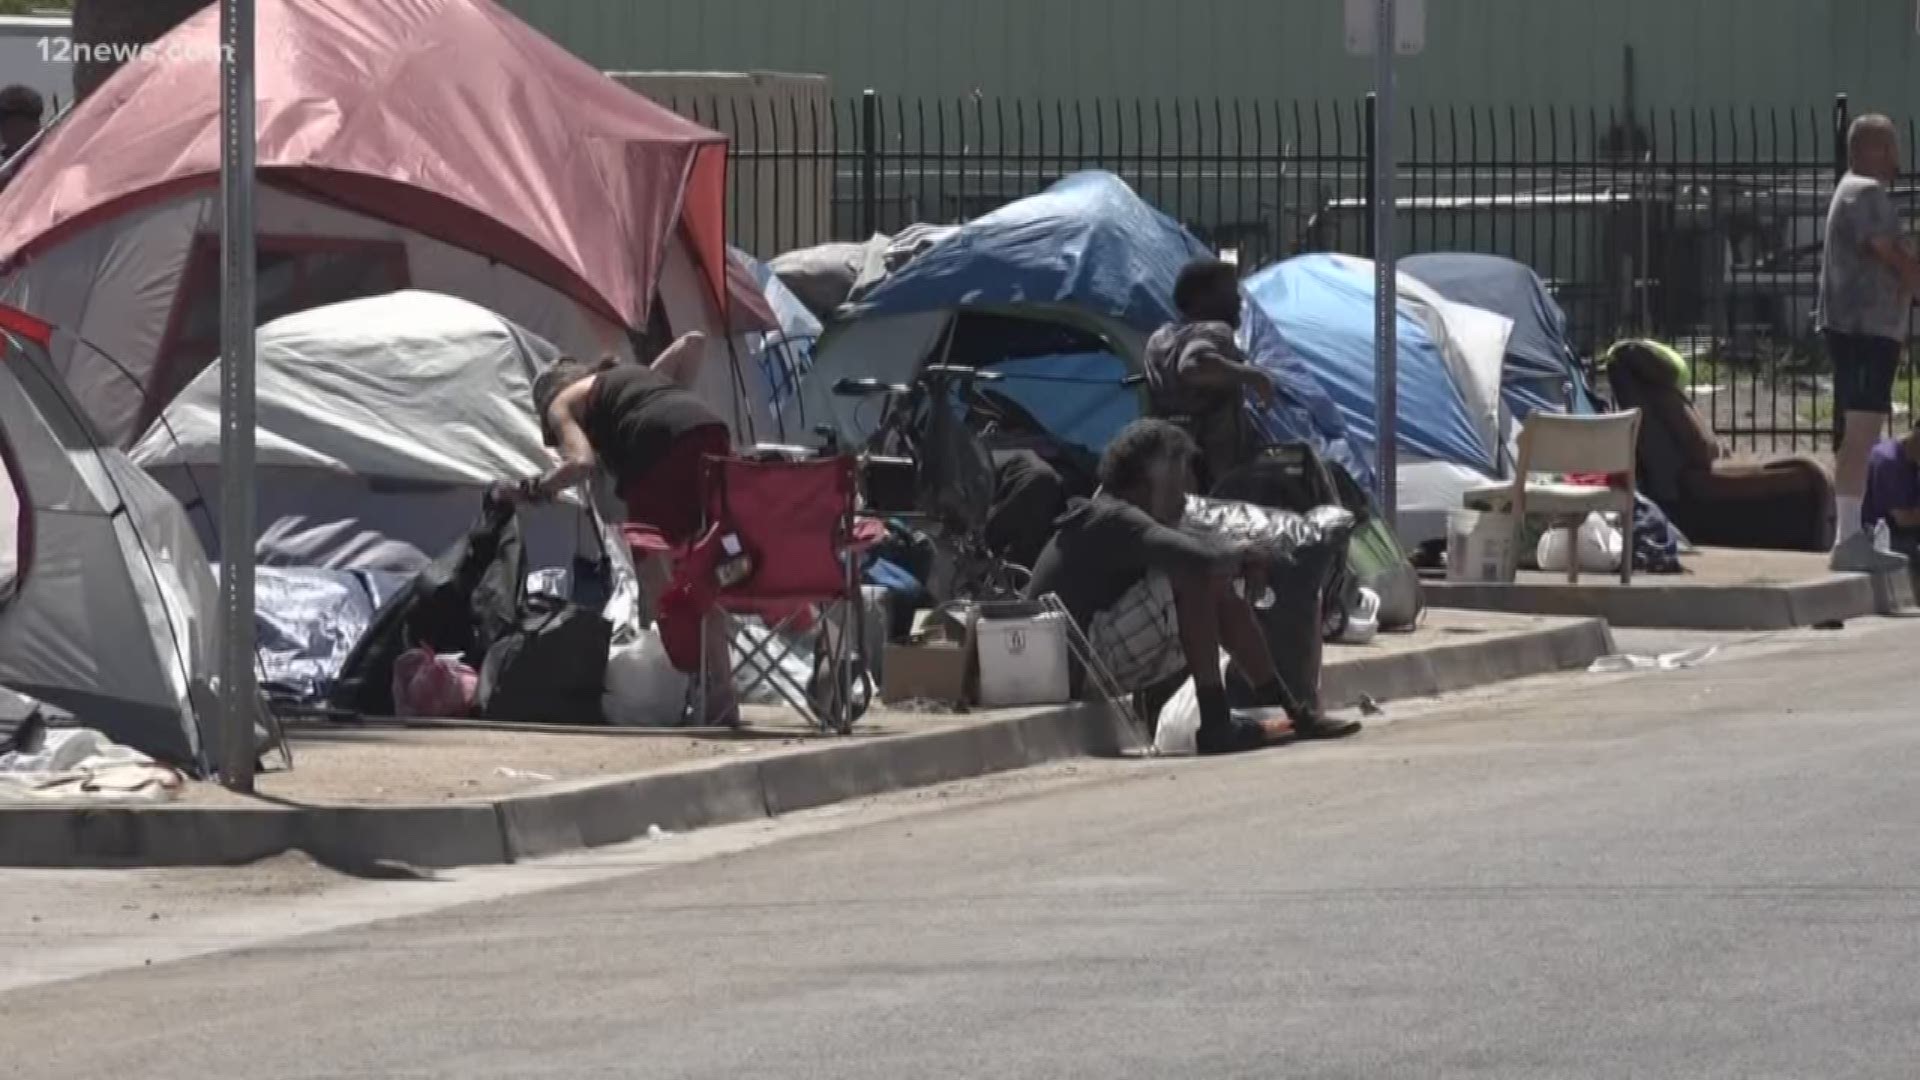 Staying at home isn't an option for the homeless. A local non-profit is taking the lead to screen the homeless in Phoenix for the coronavirus.